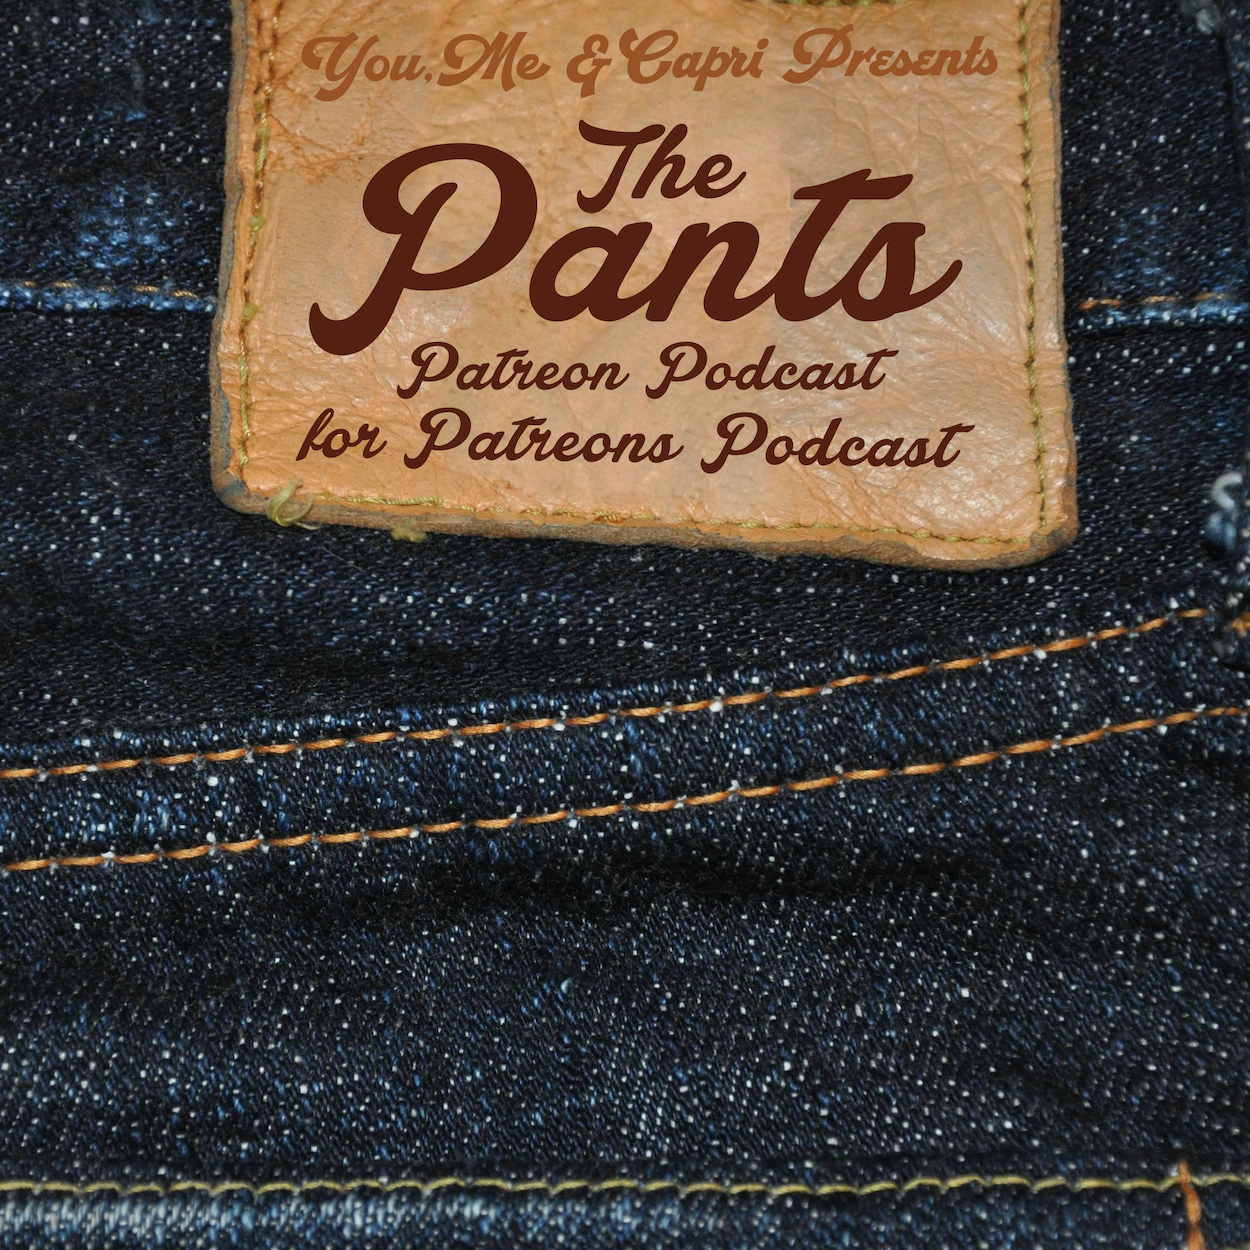 The Pants Patreon Podcast for Patrons Podcast Episode 115